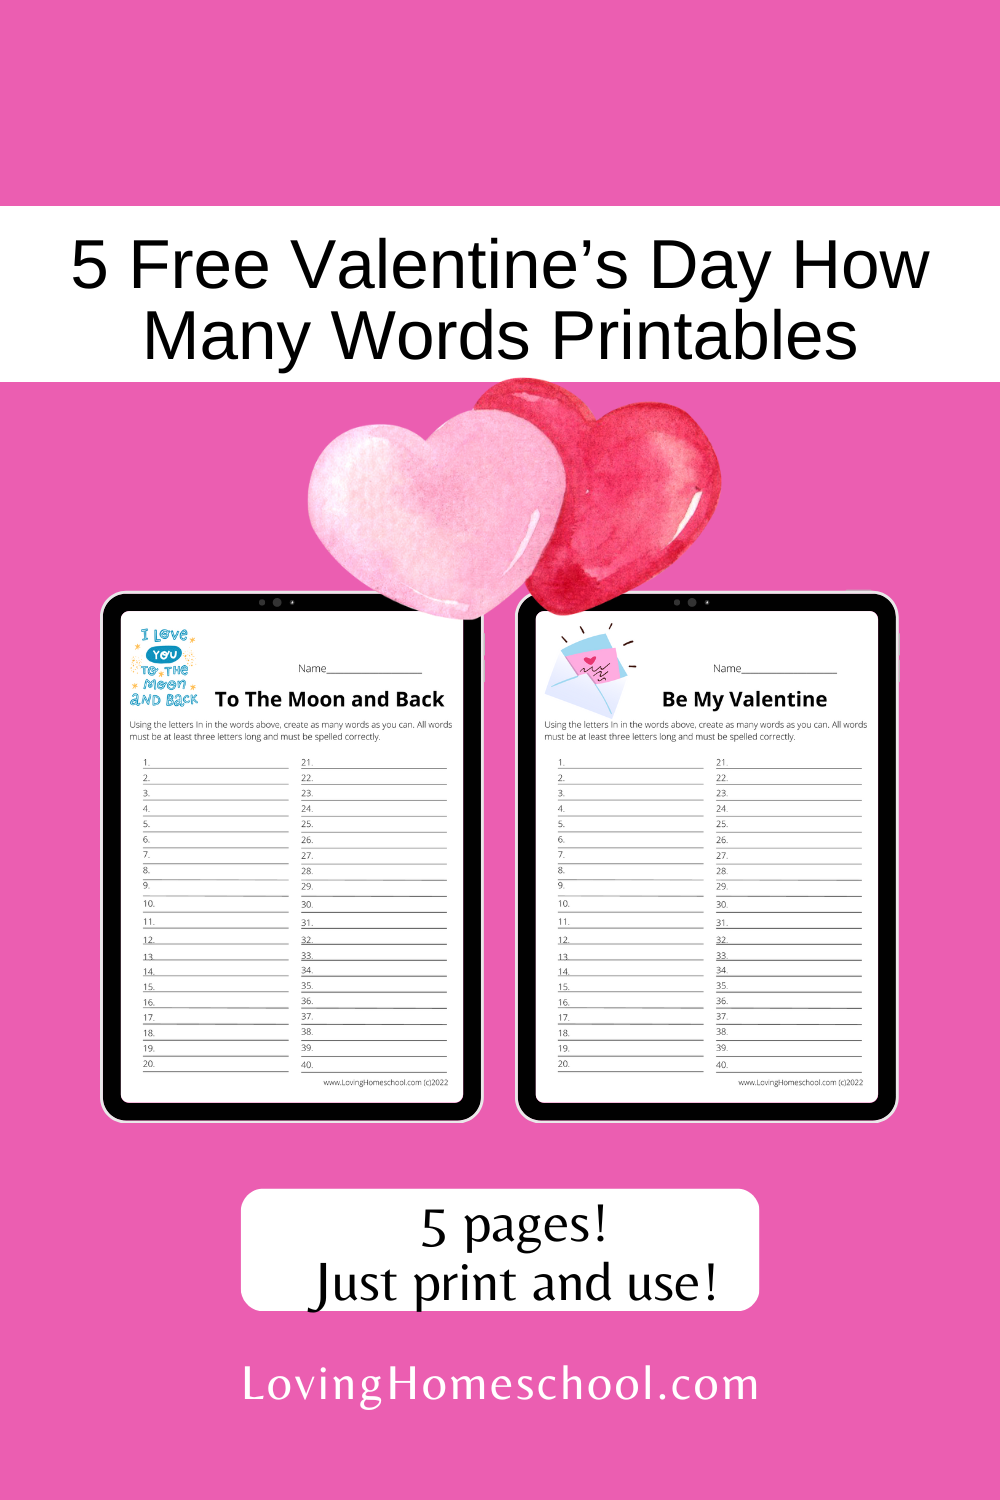 Free Valentine’s Day How Many Words Printables Pinterest Pin